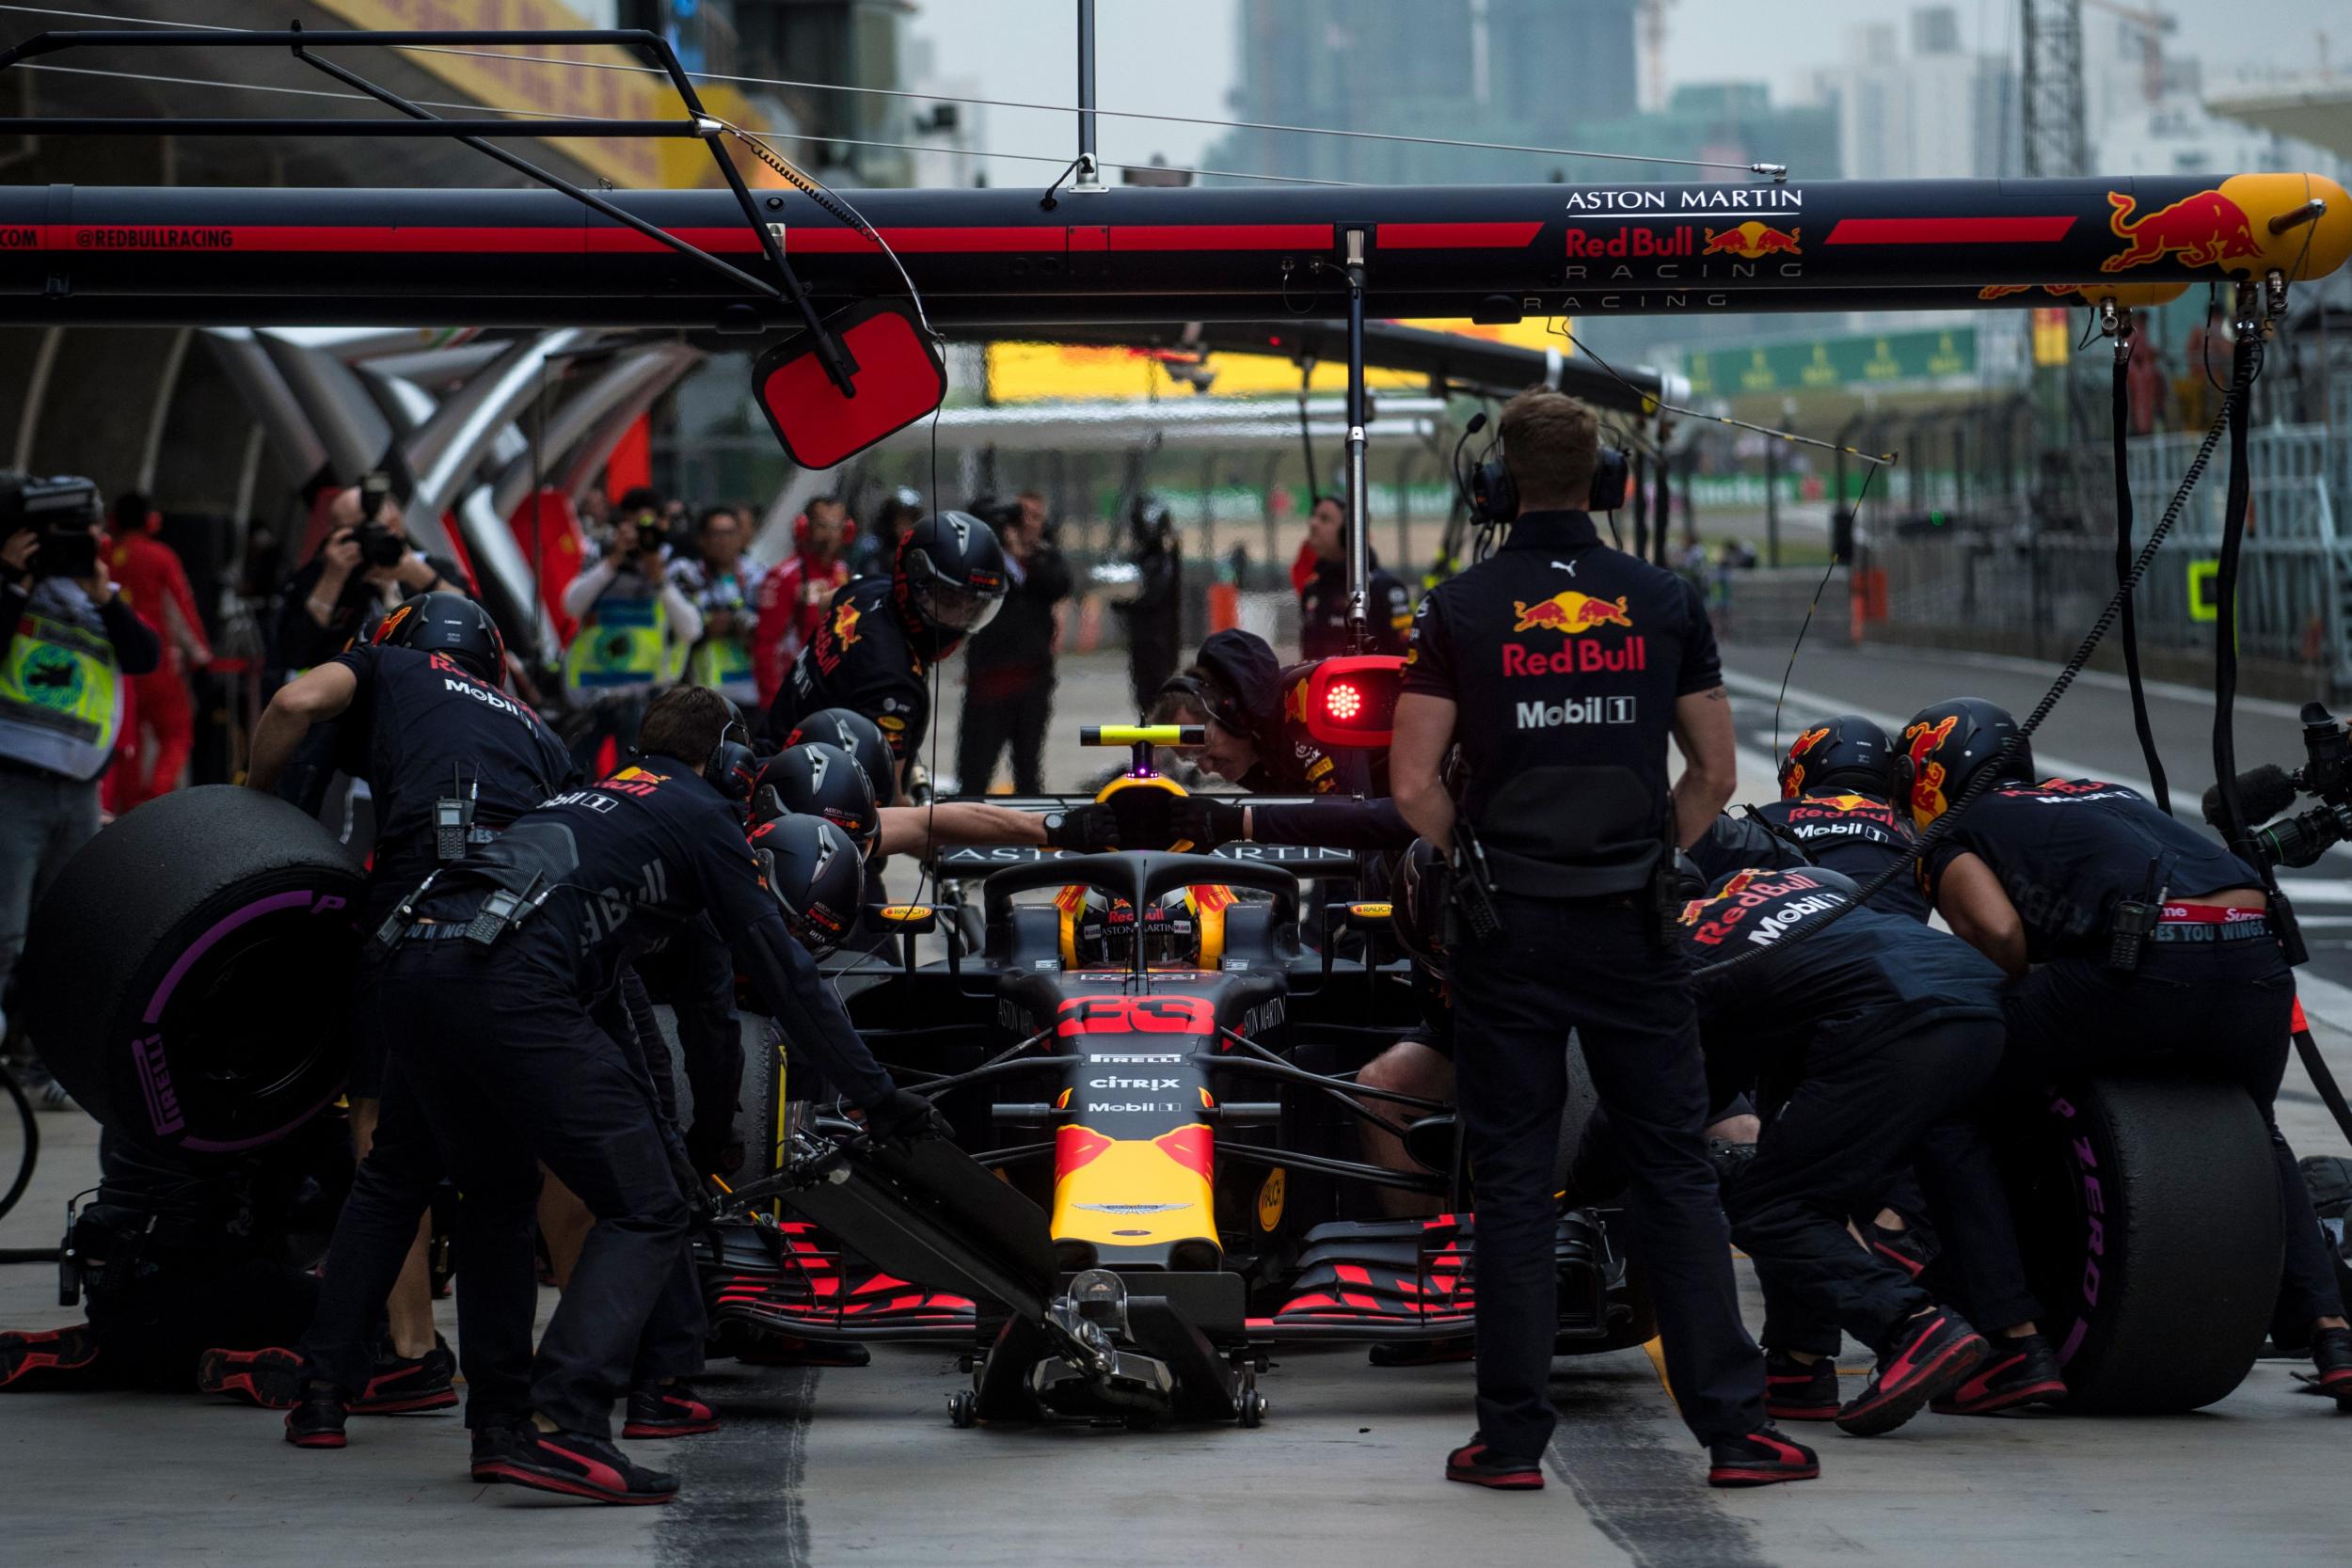 Max Verstappen is hoping for no power problems in China